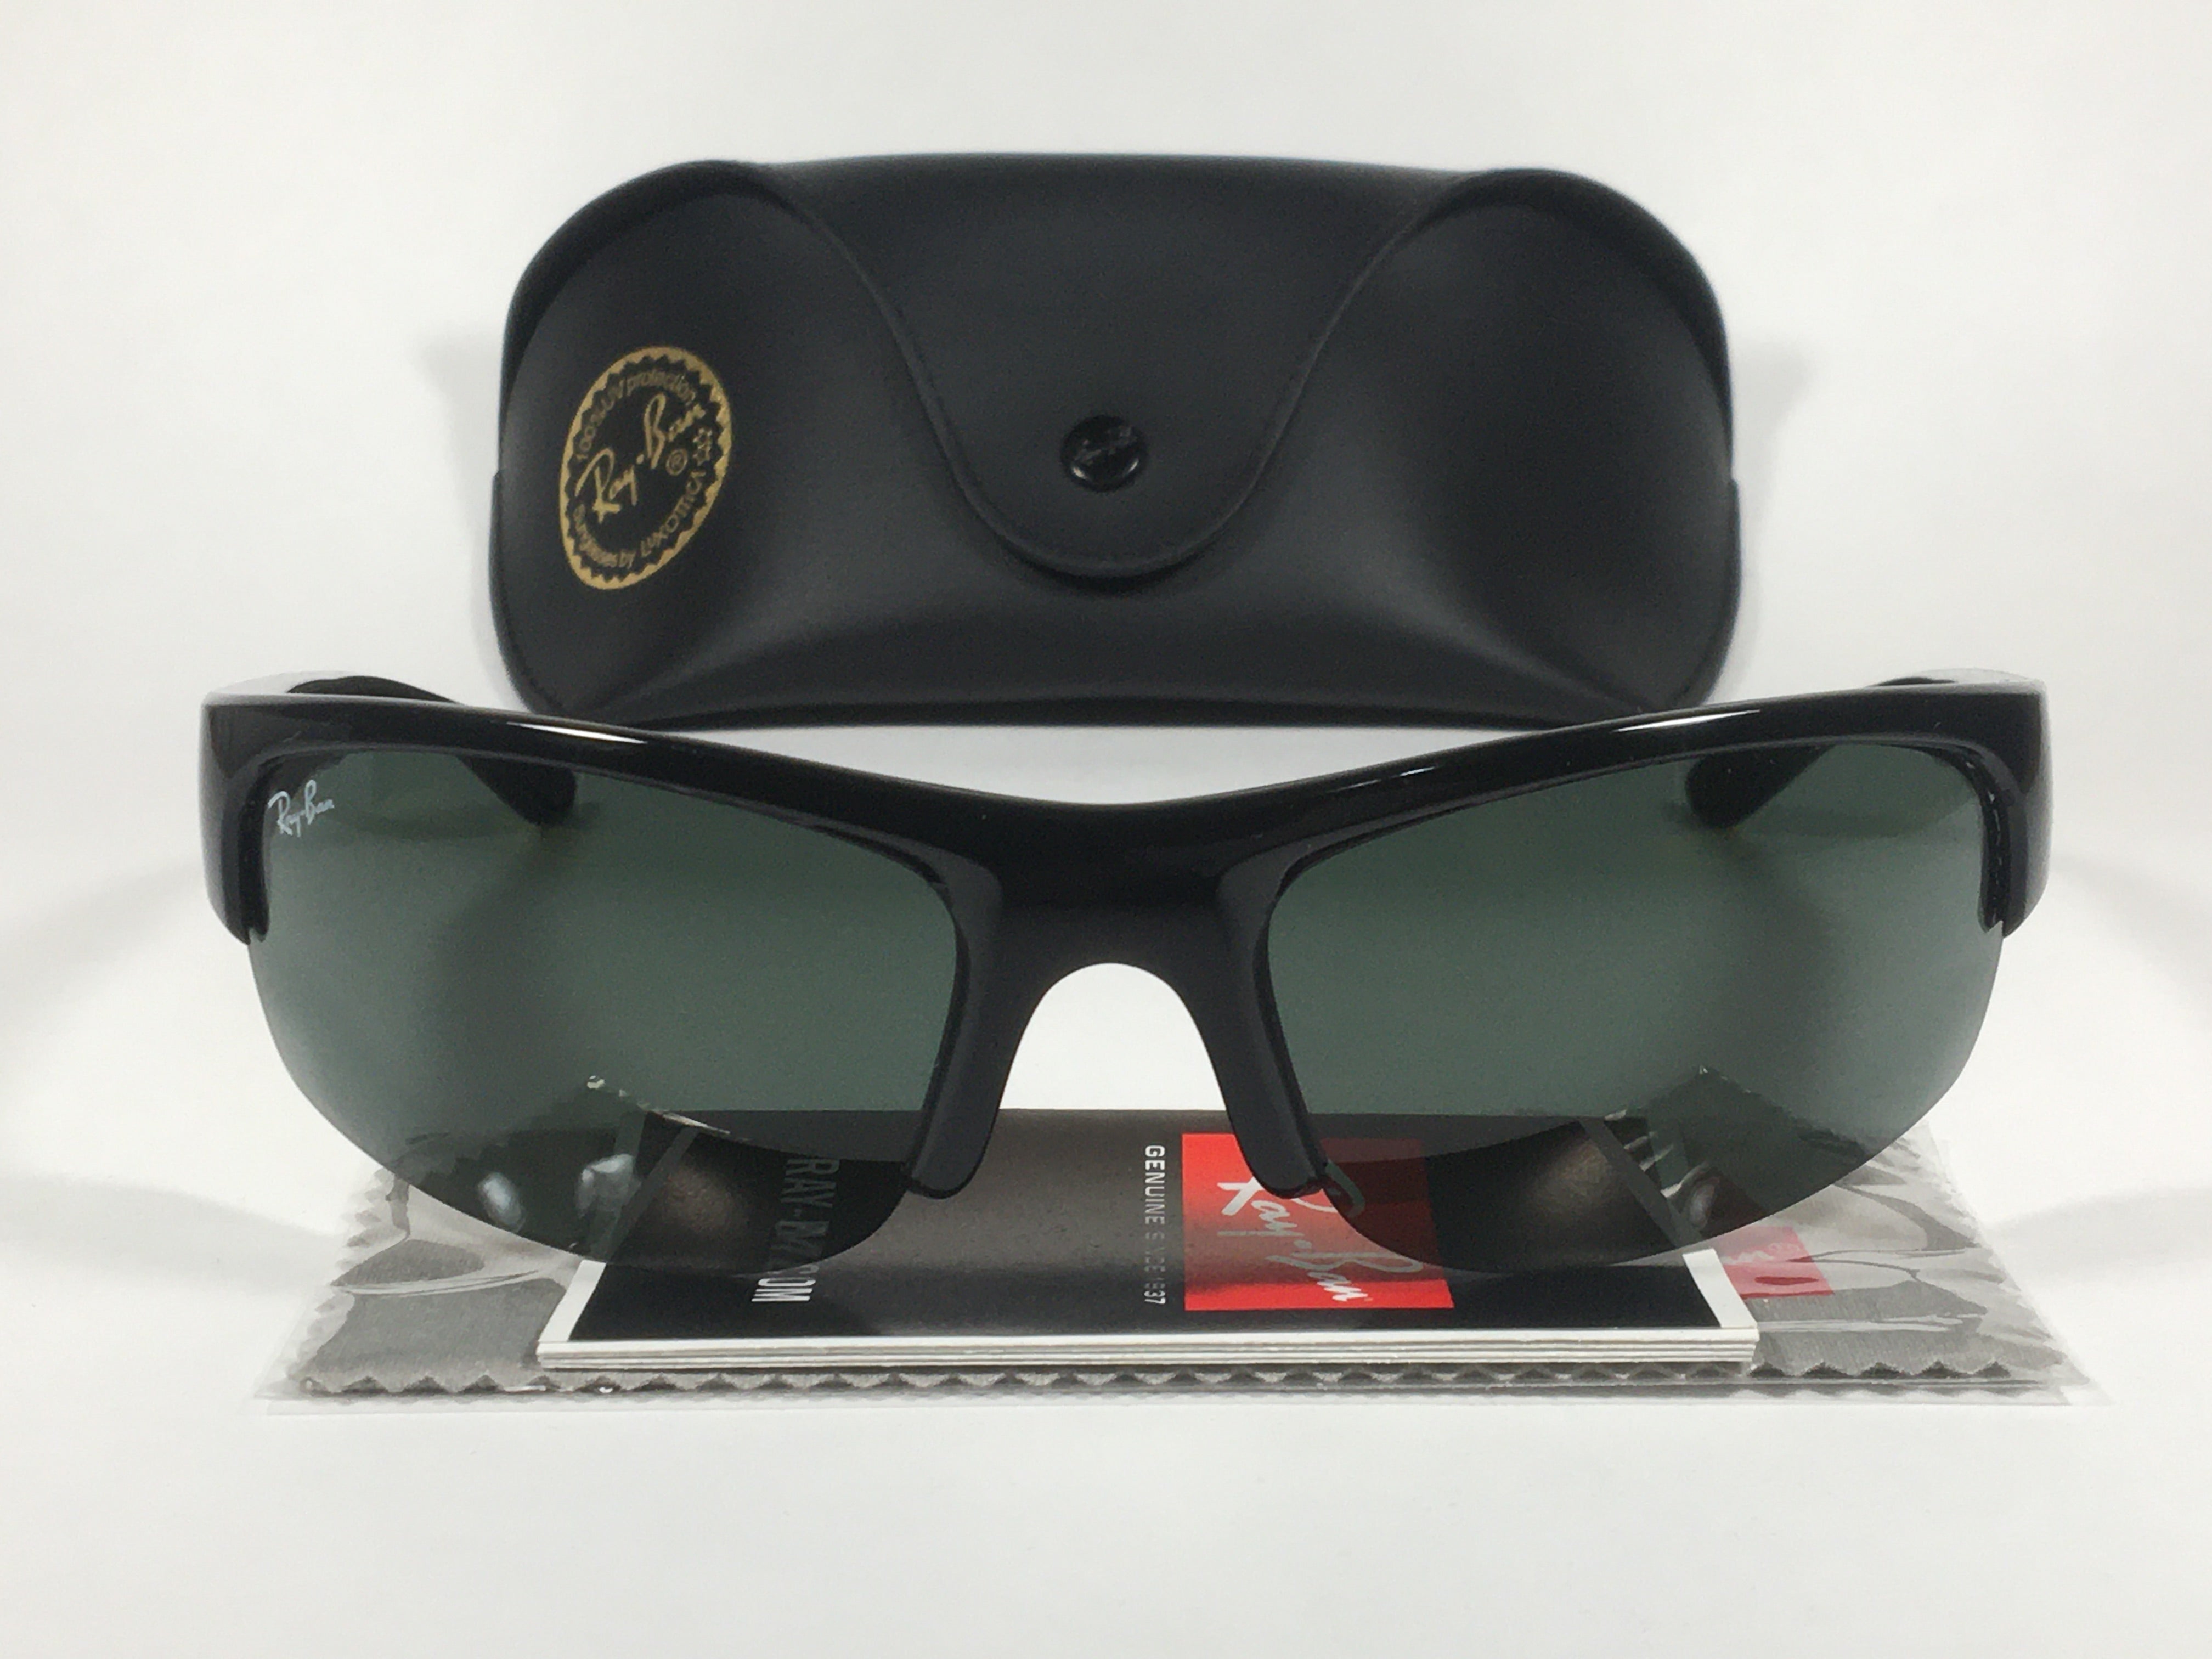 Ray-Ban Active Lifestyle Sunglasses RB4173 601/71 Sport Wrap Black 